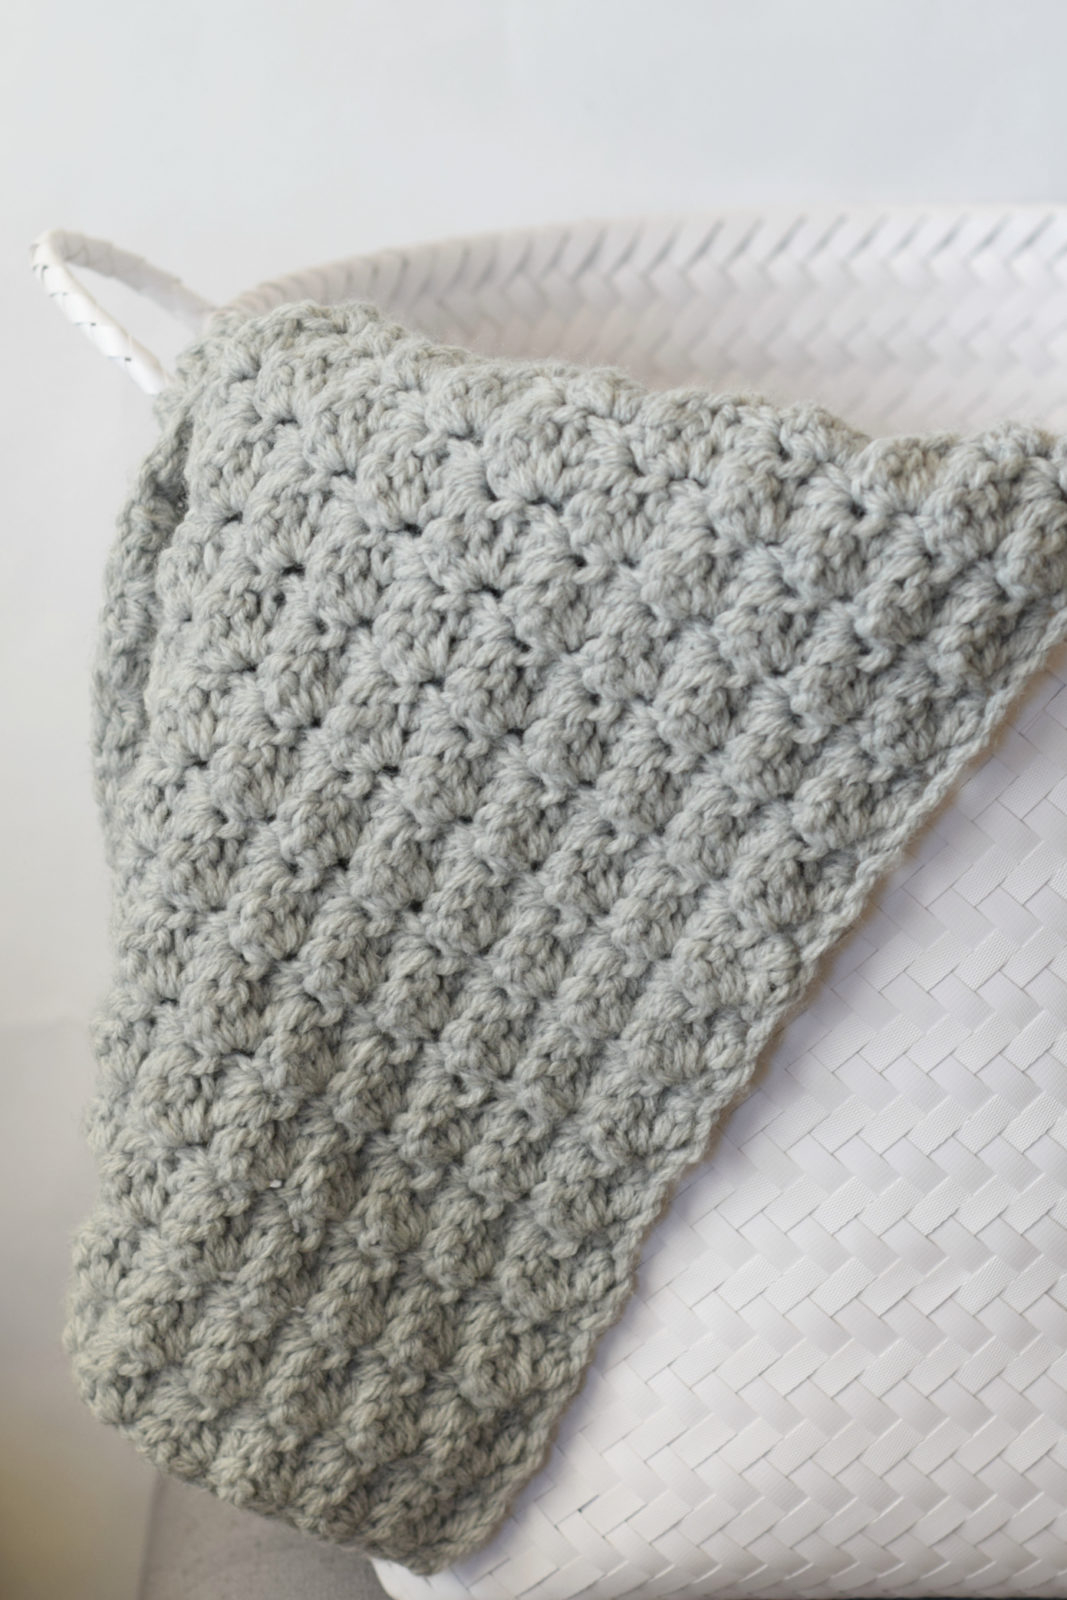 Simple Crochet Blanket Patterns Simple Crocheted Blanket Go To Pattern Mama In A Stitch